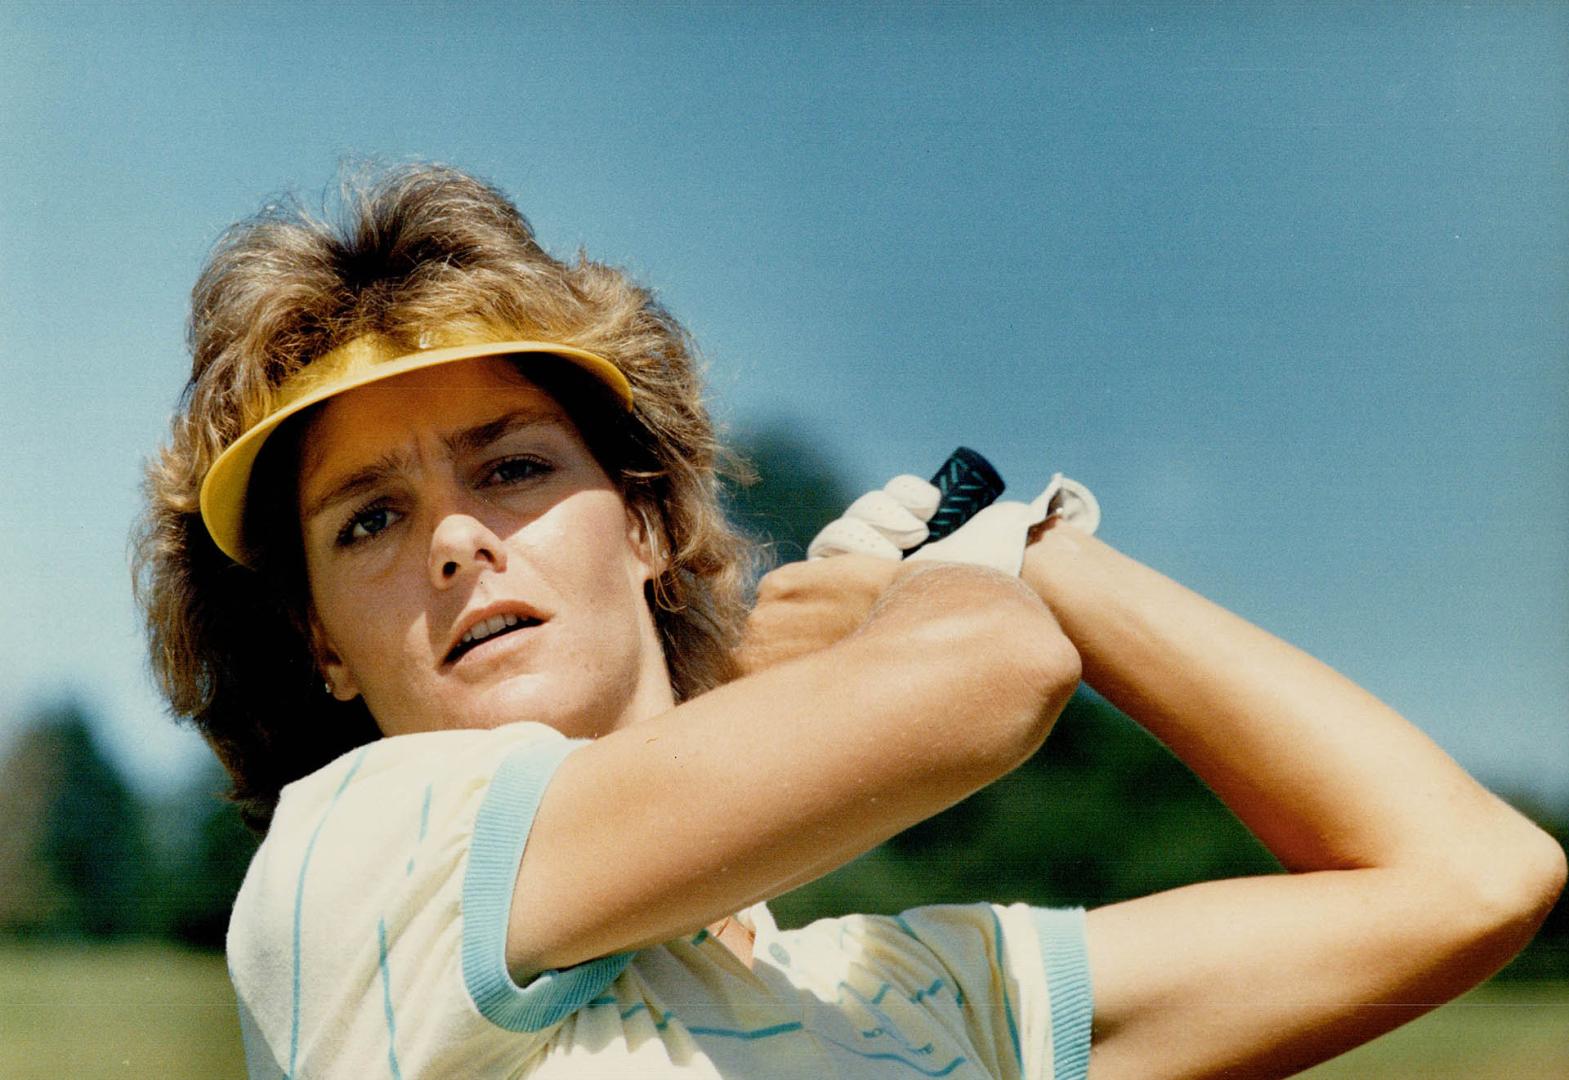 Barbara Bunkowsky, the Burlington golfer who combined athletic skill with model good looks, has been going through a two-year drought on the Ladies Pr(...)